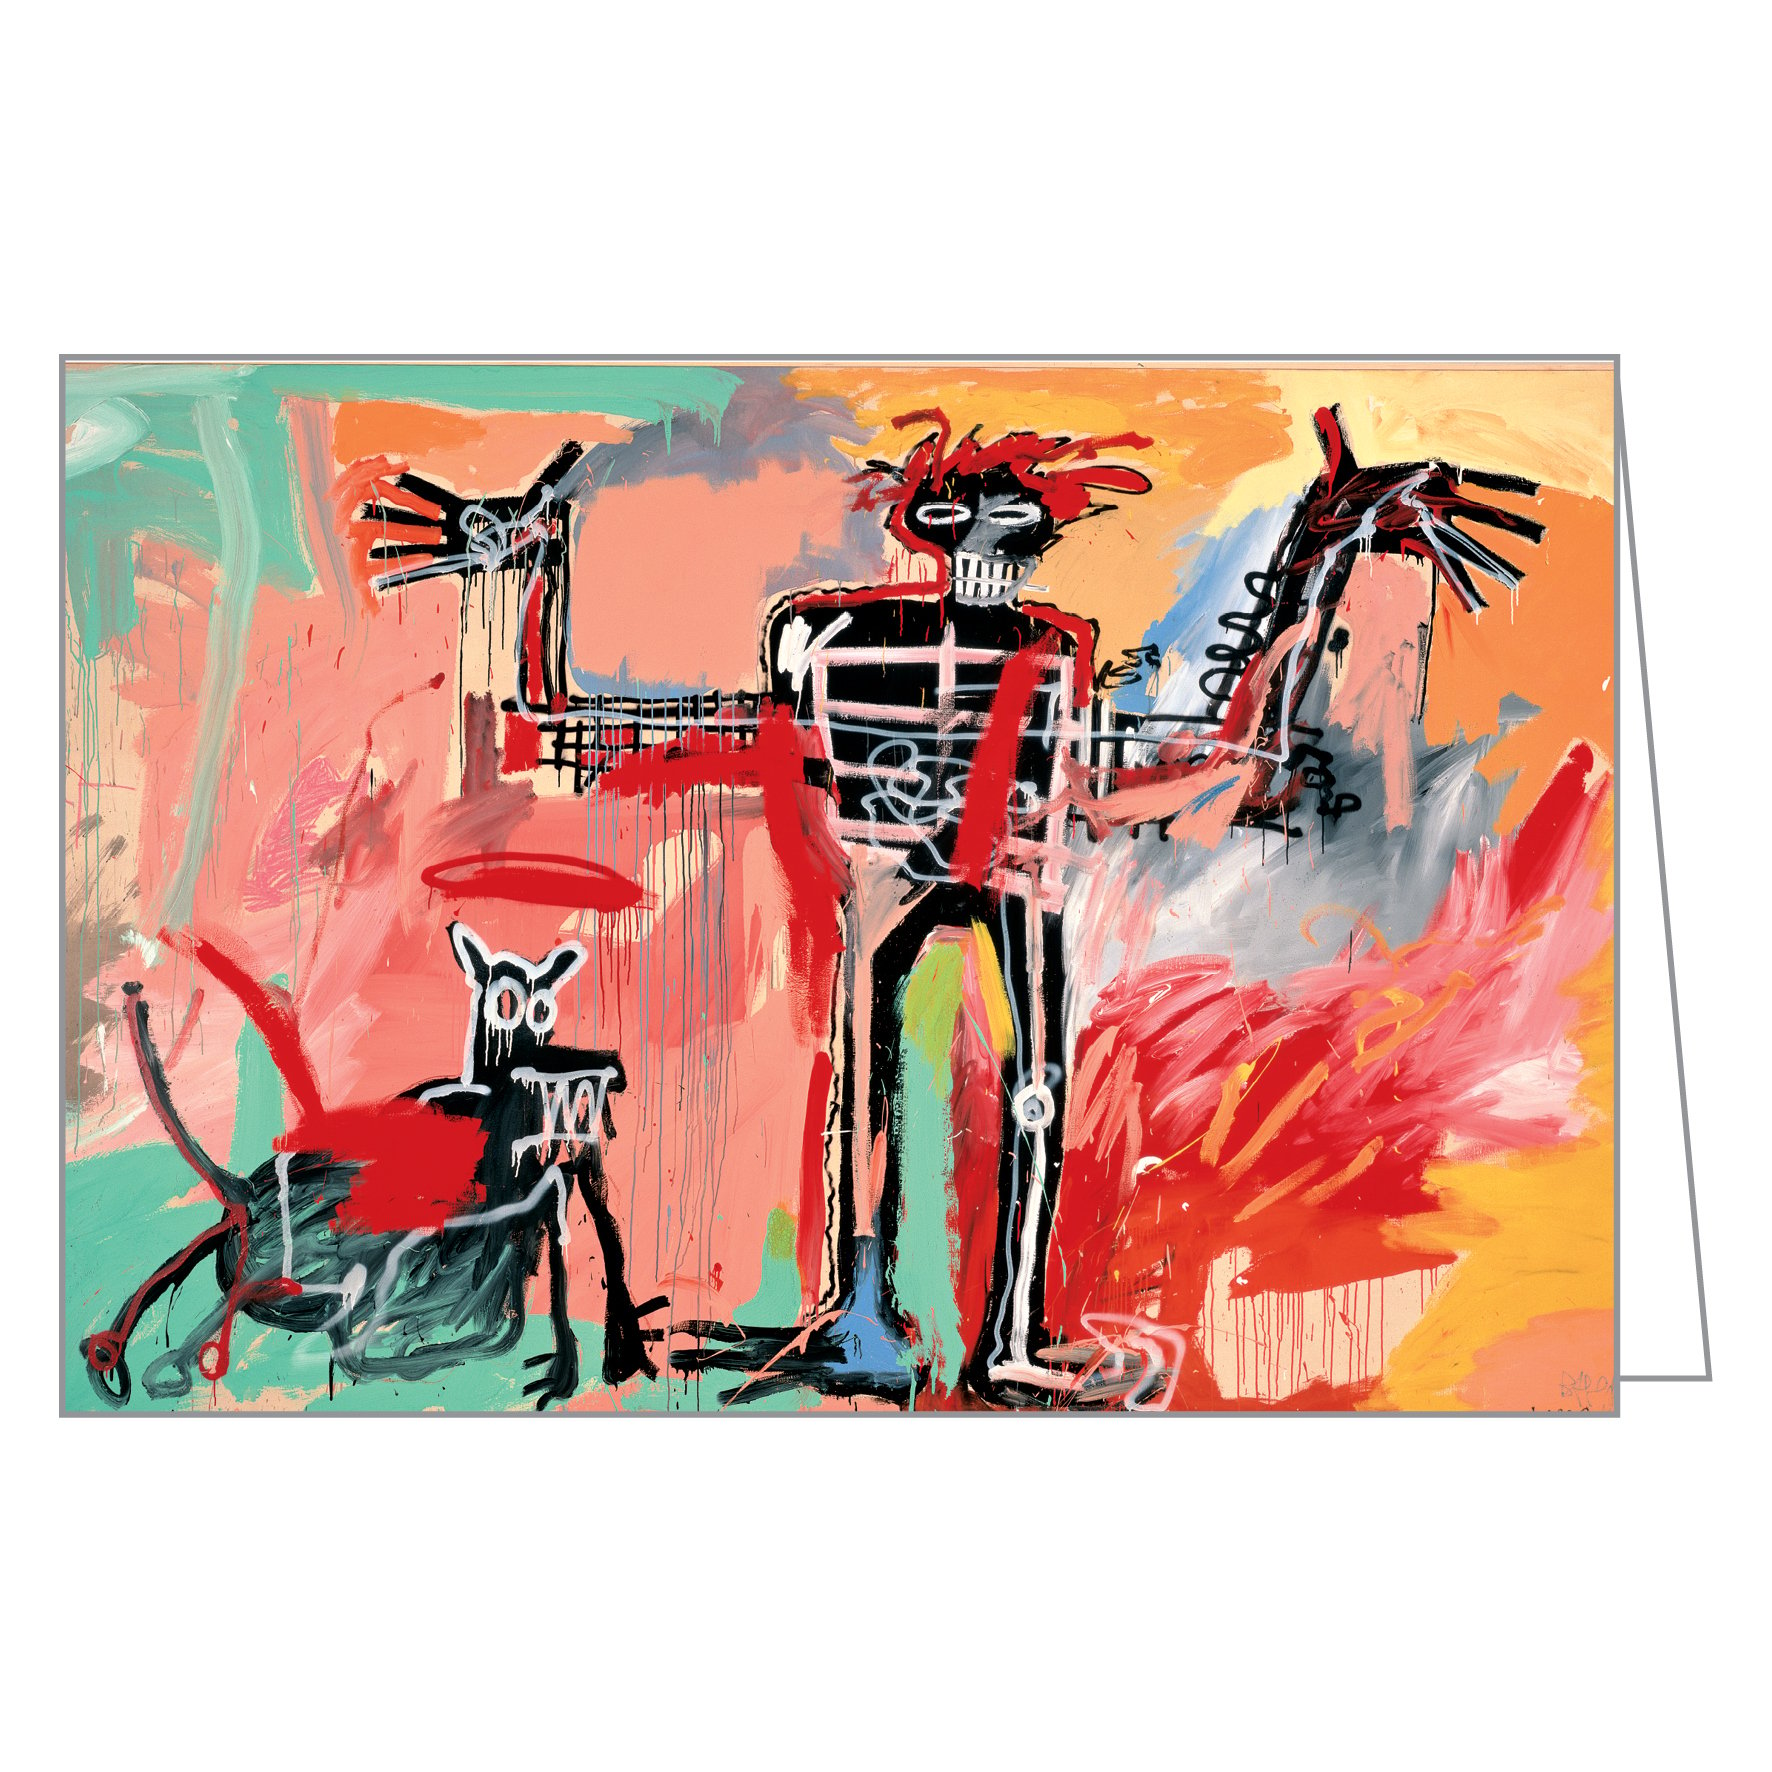 Graffiti style painting 'Bird on Money' by Jean-Michel Basquiat, to cover of notecard box, by teNeues stationery.